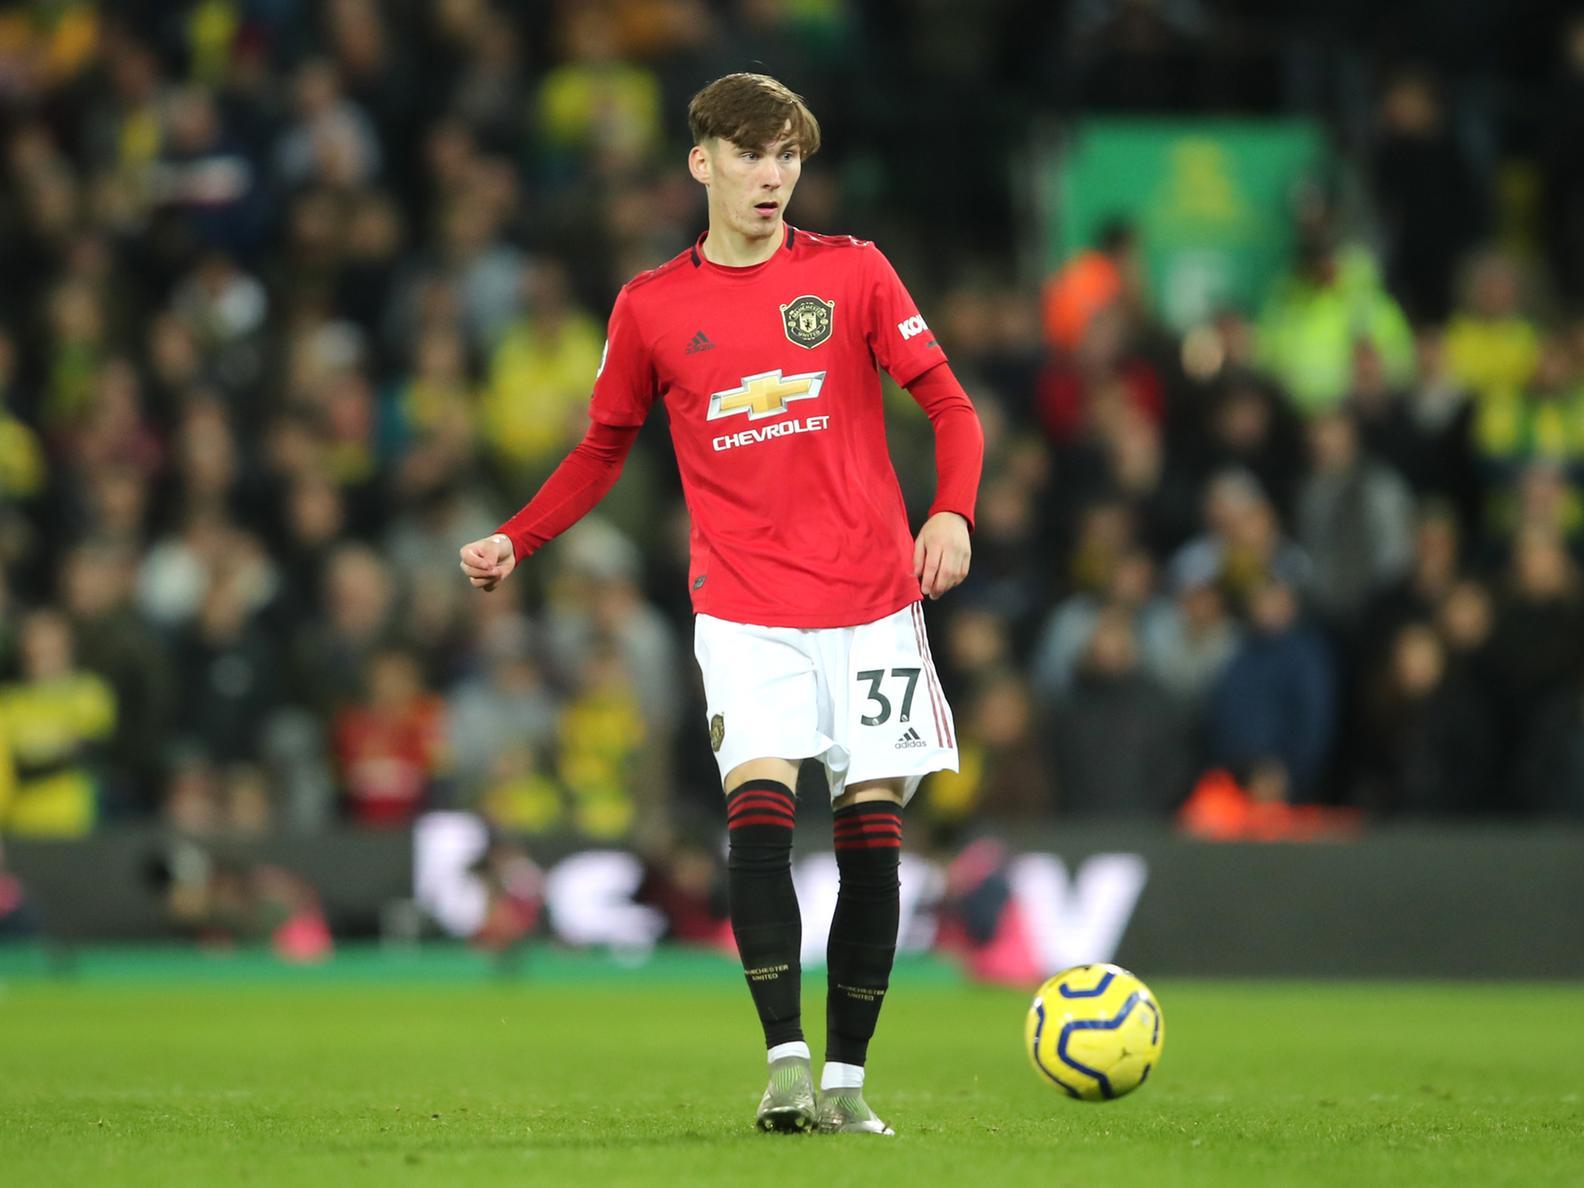 Sunderland have been linked with Manchester United youngster James Garner this month - but will face a battle to land his signature. (Sunderland Echo)